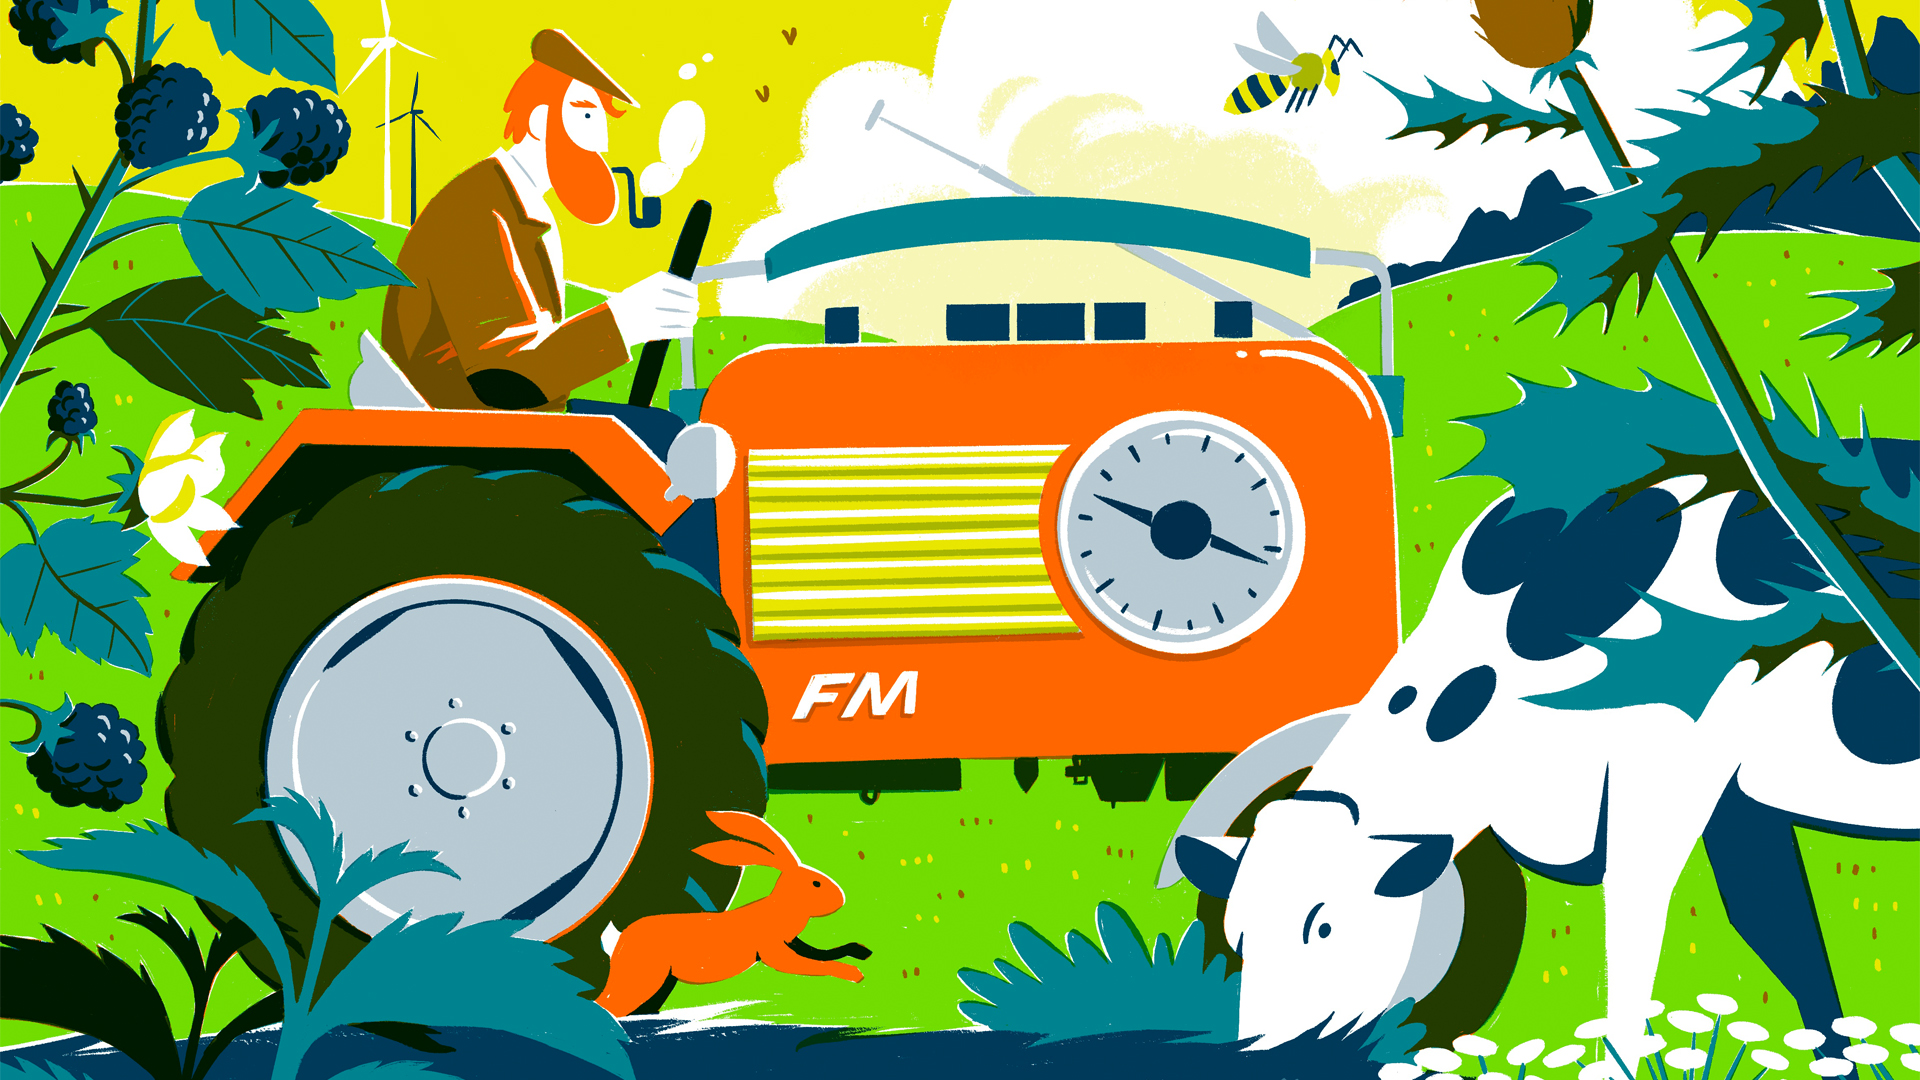 Till Lukat's illustration of a farmer driving a tractor made of a giant radio